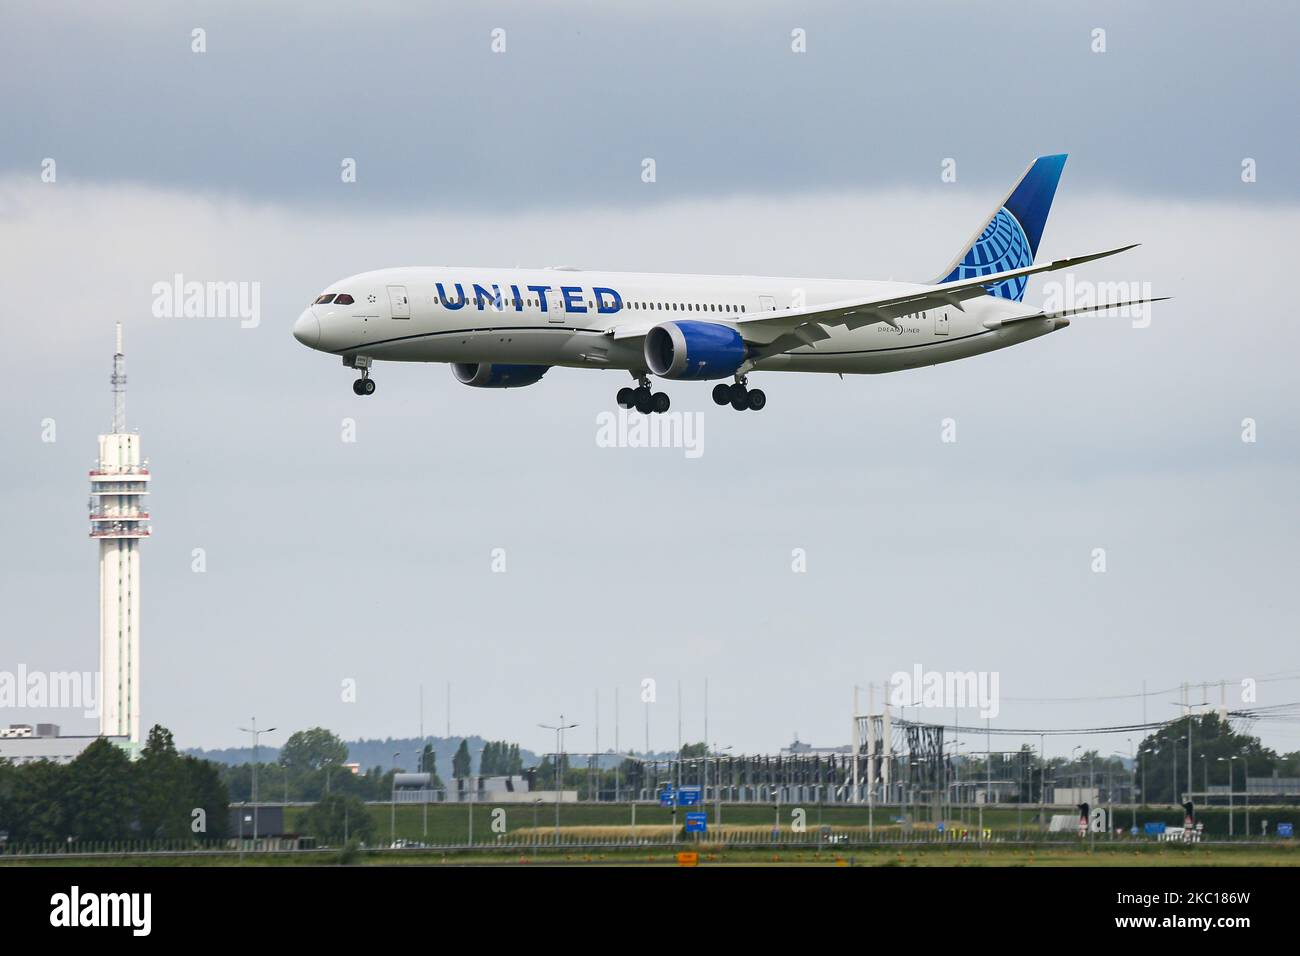 United Airlines Boeing 787-9 Dreamliner aircraft as seen on final approach flying and landing at Polderbaan runway in Amsterdam Schiphol AMS EHAM Airport in the Netherlands, arriving from Newark EWR New York, NY, USA on August 30, 2020. The advanced modern wide body airplane has the new livery paint scheme and the registration N24976 and 2x GE jet engines. United UA UAL is the third largest airline in the world and a member of Star Alliance aviation alliance. United is connecting US with Europe and the Netherlands with Cargo and passenger flight during the Covid-19 Coronavirus Pandemic period. Stock Photo